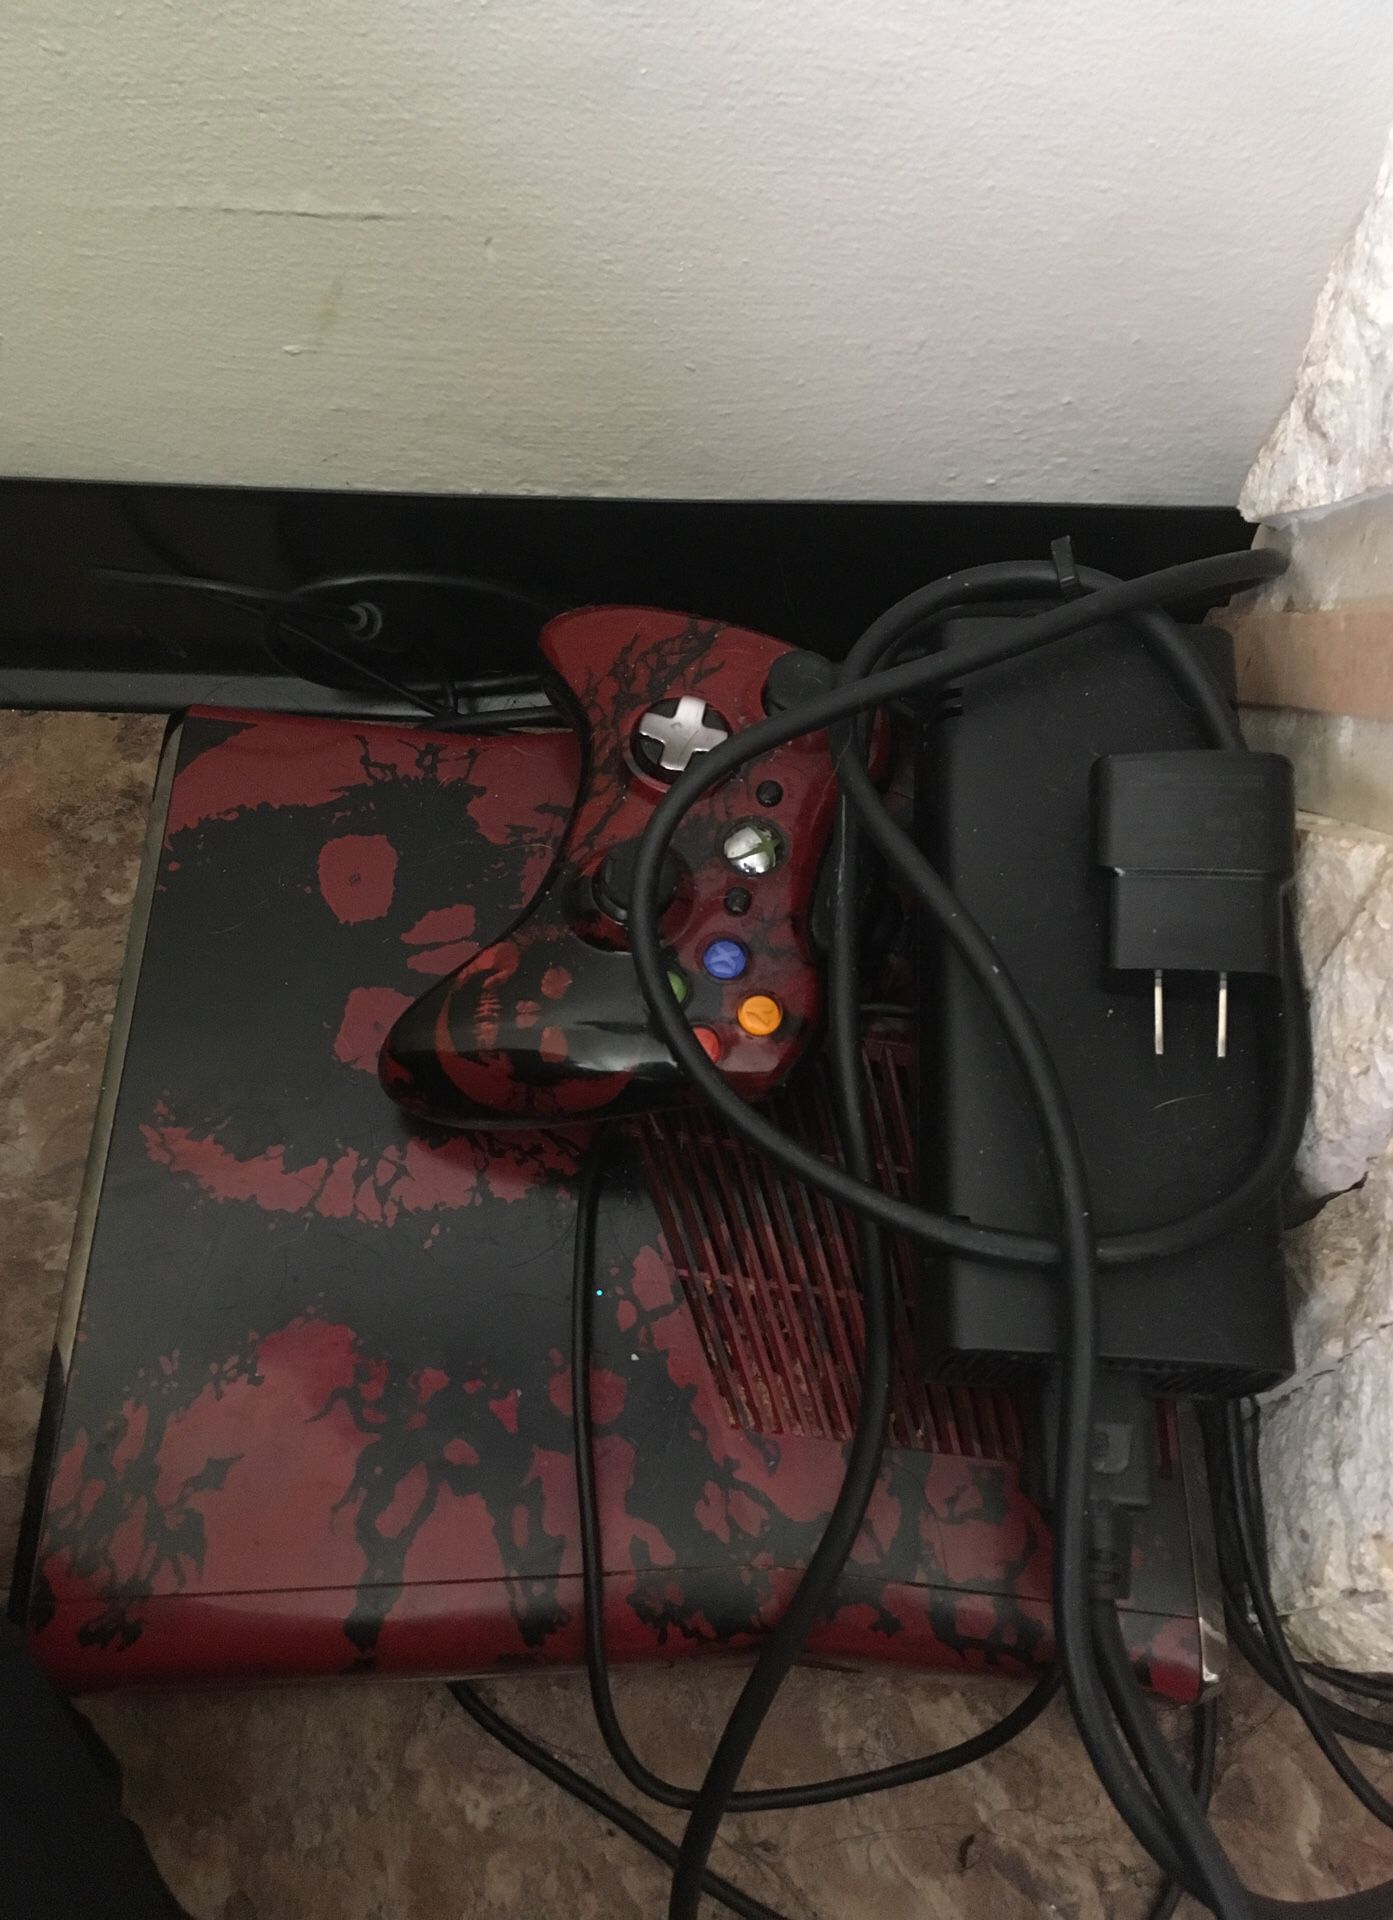 Xbox 360 comes with controller and wires needed $150